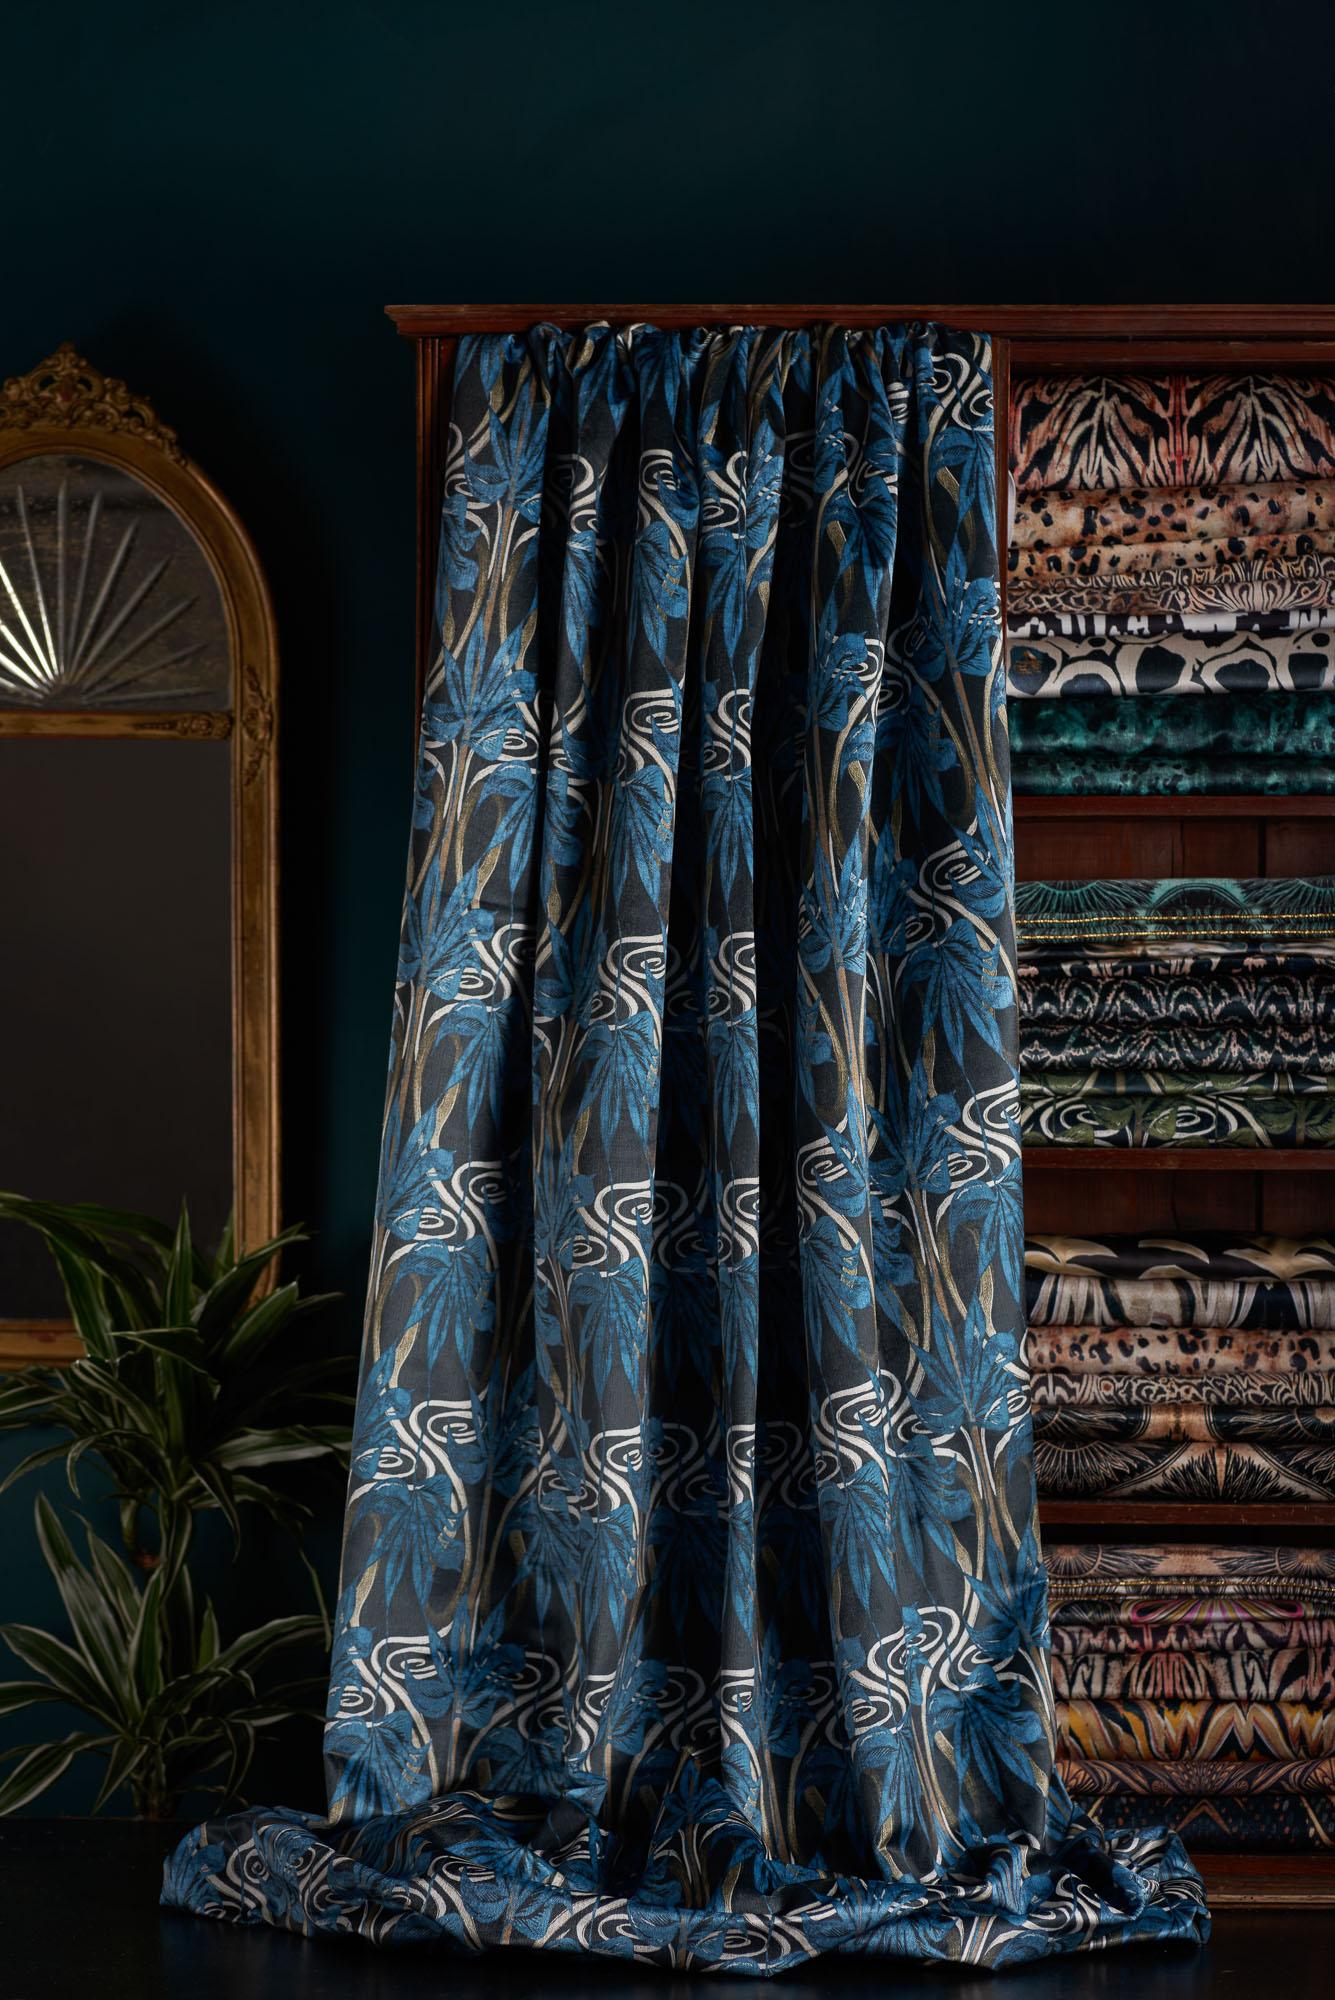 Dianne is a sandwiched print of two of Anna’s linocuts, pieced together to form a lyrical, jungle-like design which lends well to maximalist schemes. With a hint of Art Nouveau influence, this lush blue and green colourway sits well with monochrome